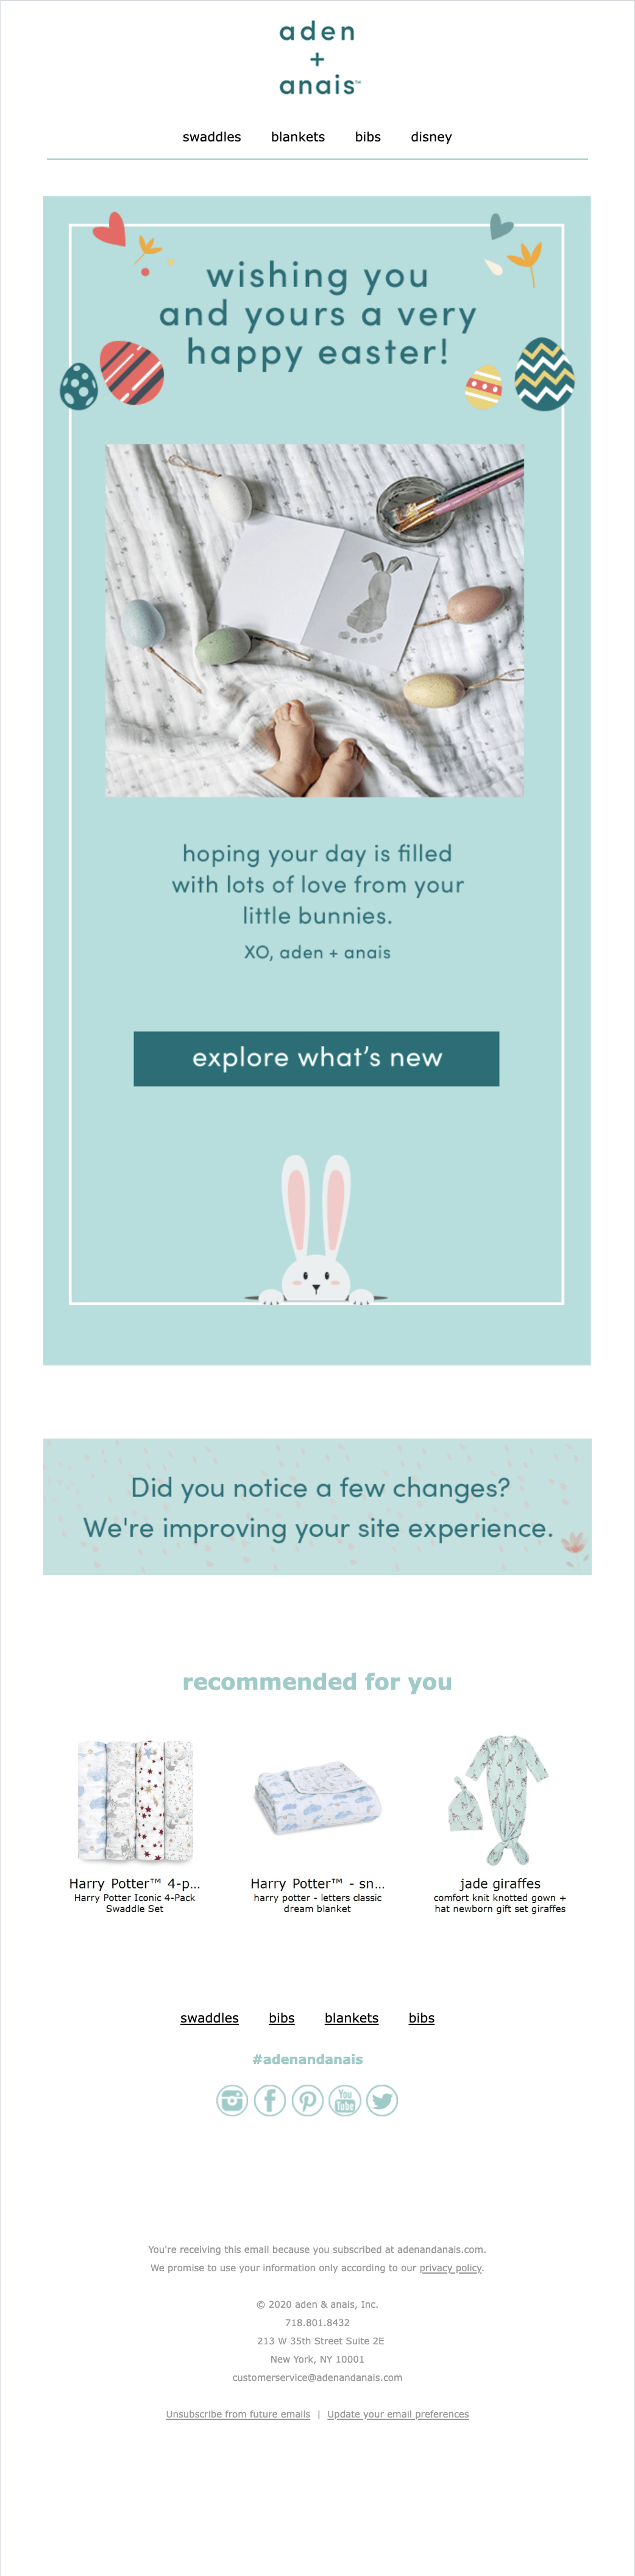 Easter Email Example by Aden + Anais